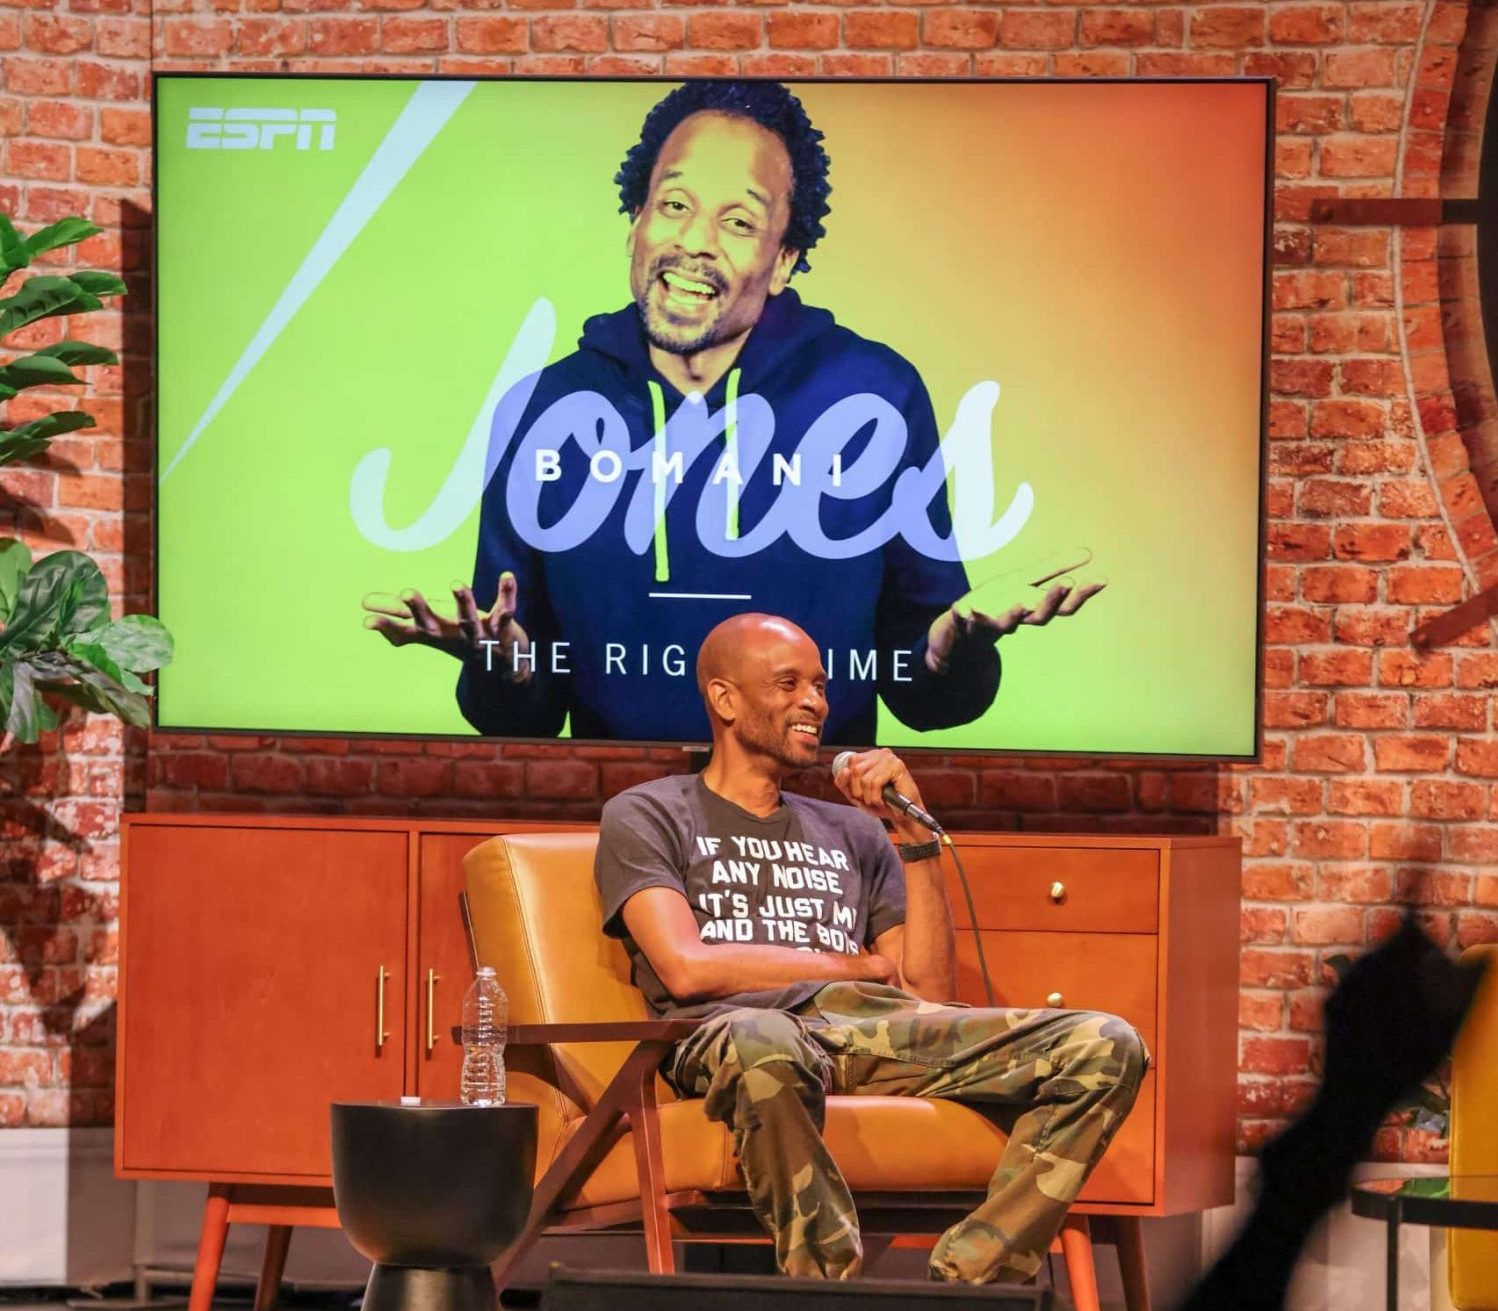 After ESPN Exit, Bomani Jones Starts New Media Life On His Own